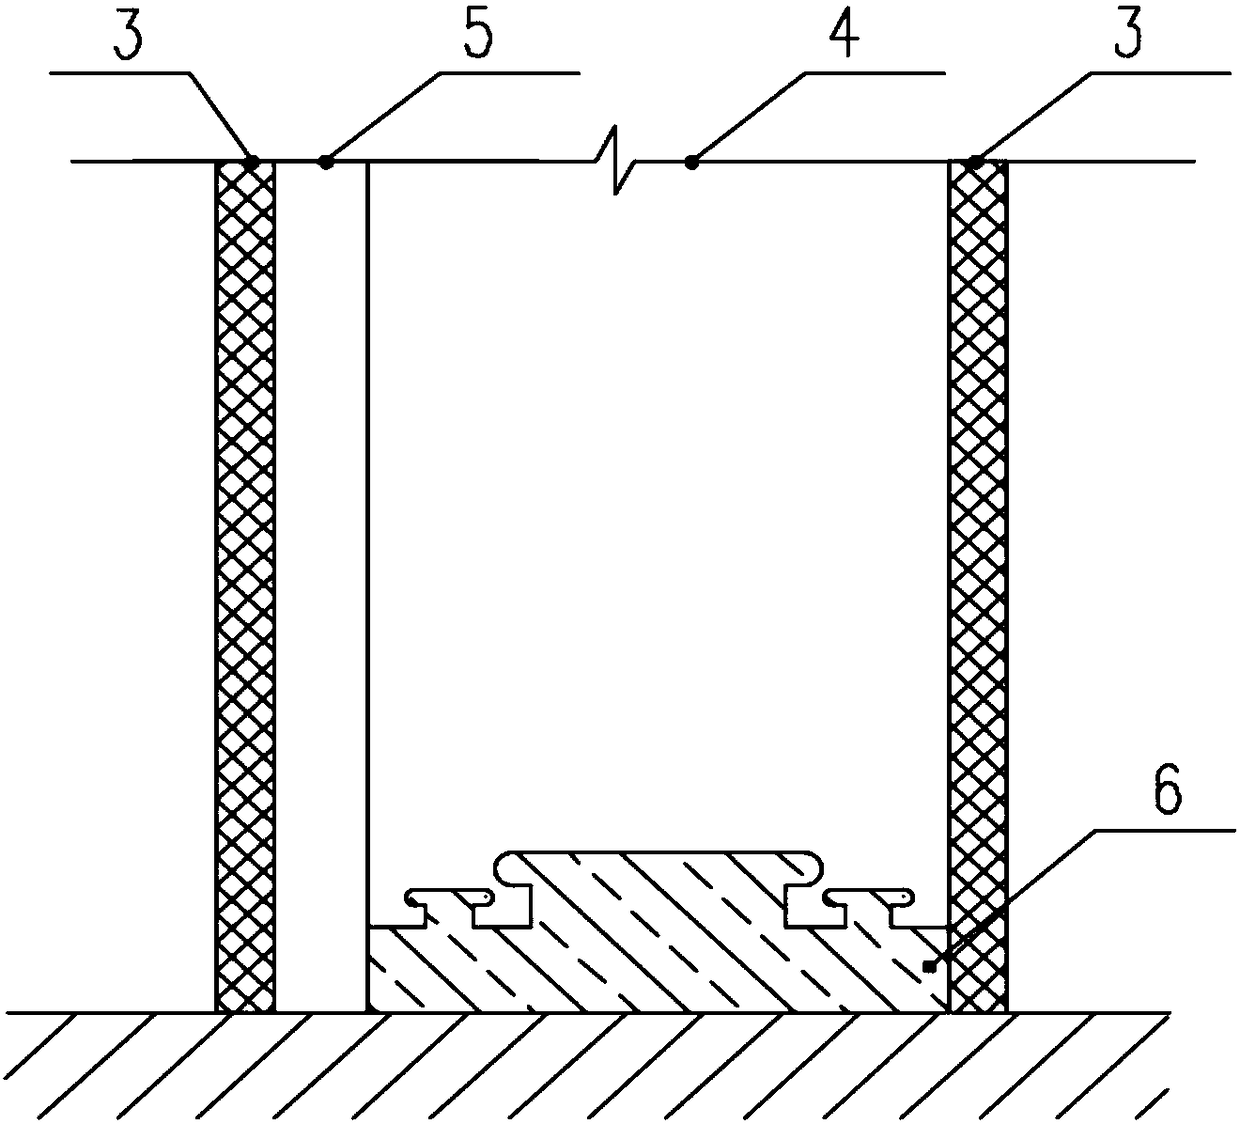 Magnetic-extruding-type automatic lifting flood-proofing baffle system and building waterproofing method